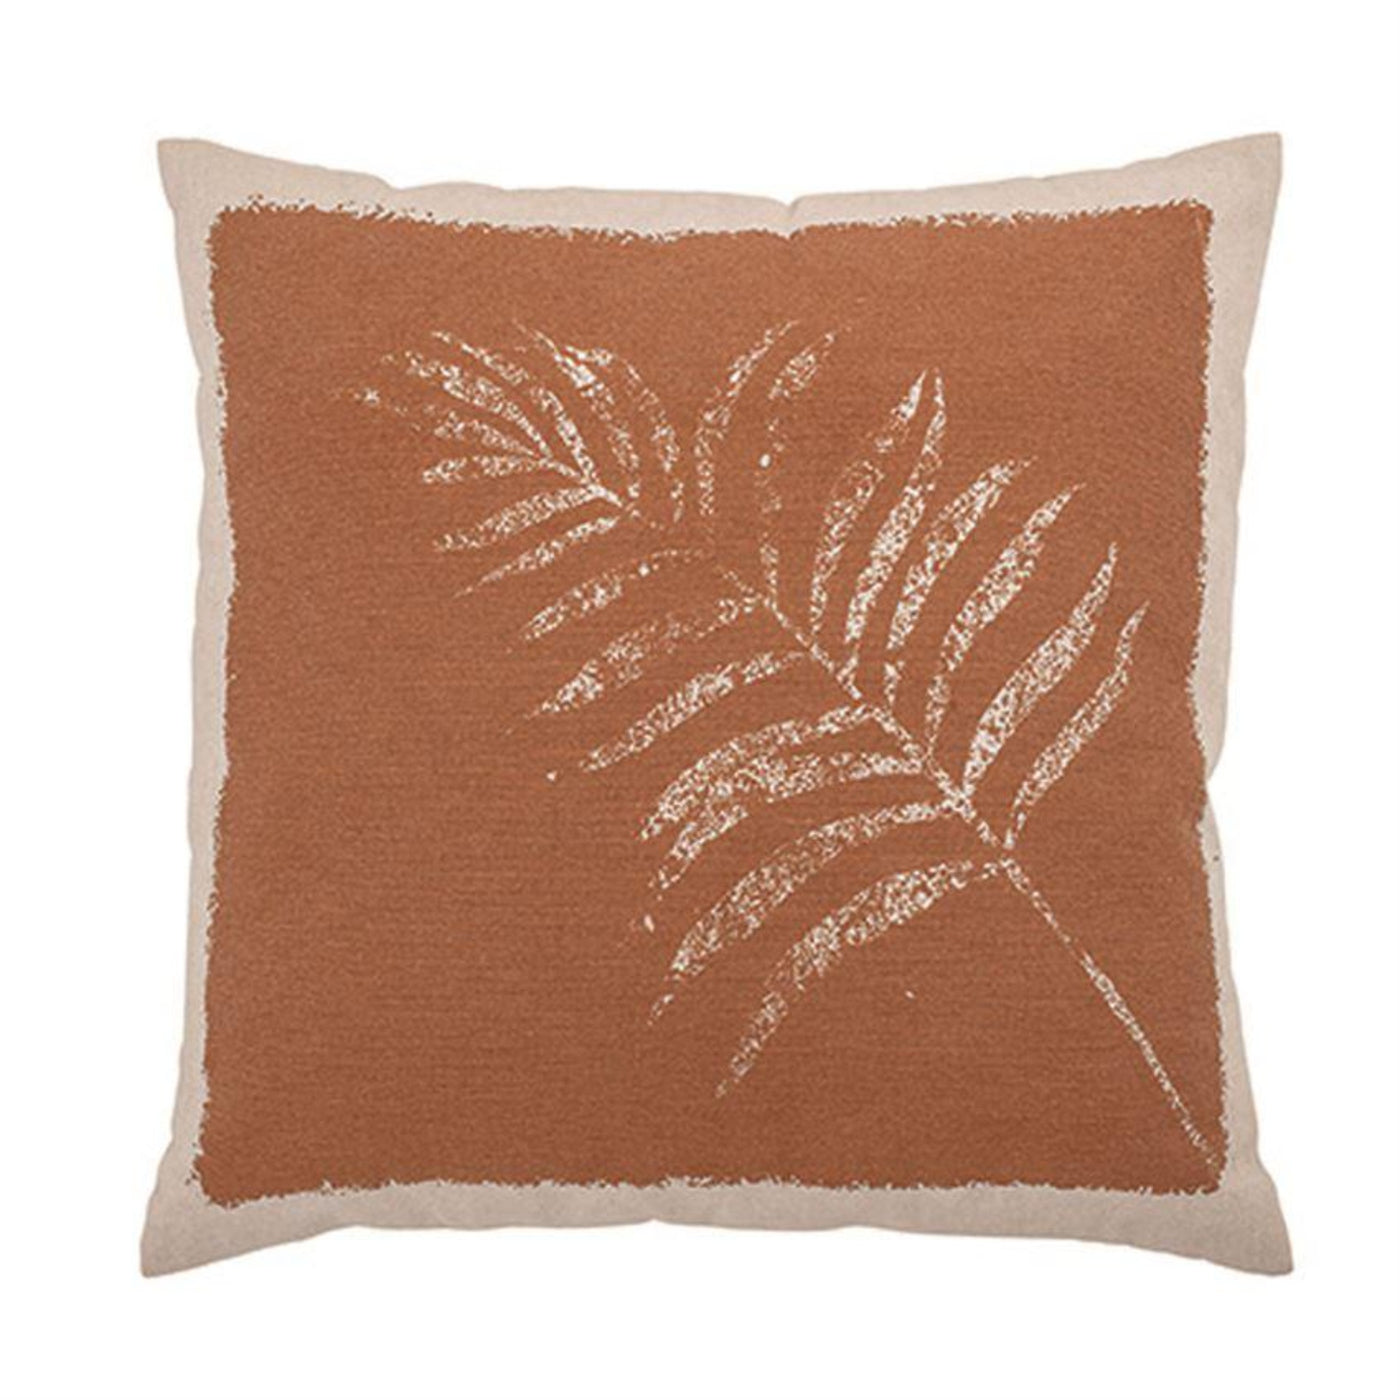 Frond Printed Square Pillow